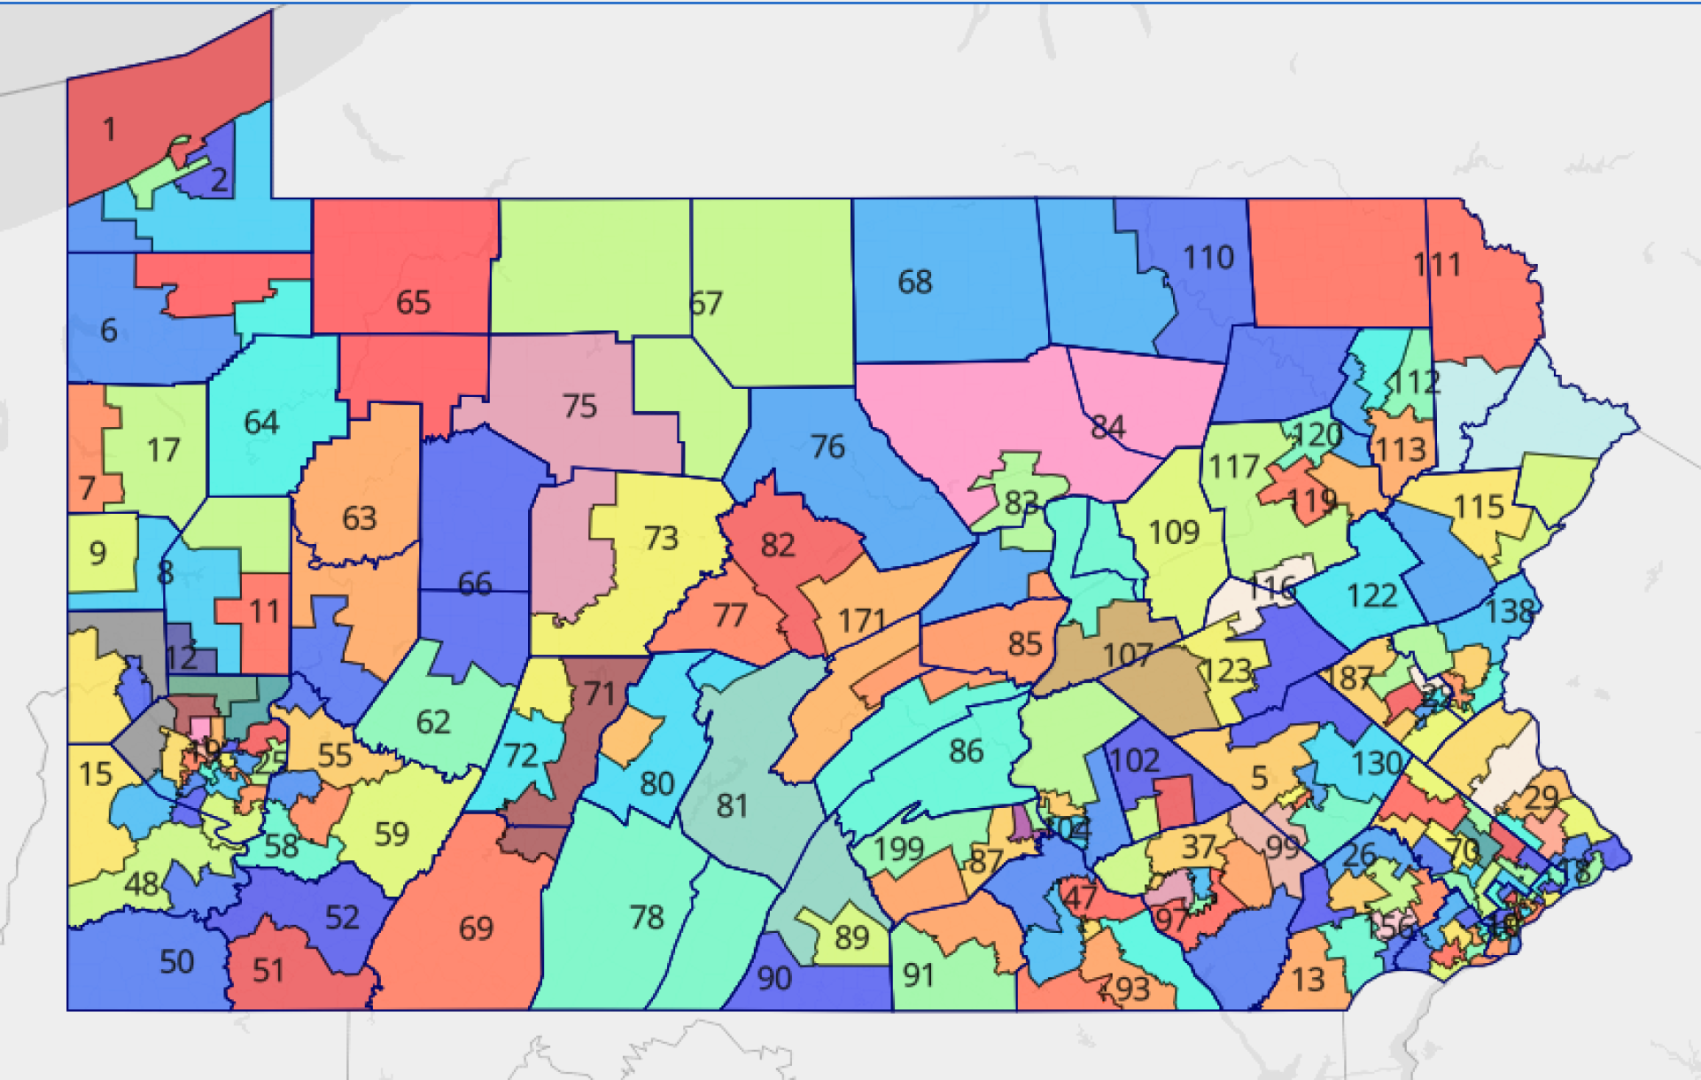 The 82nd district is in the middle of Centre County.
